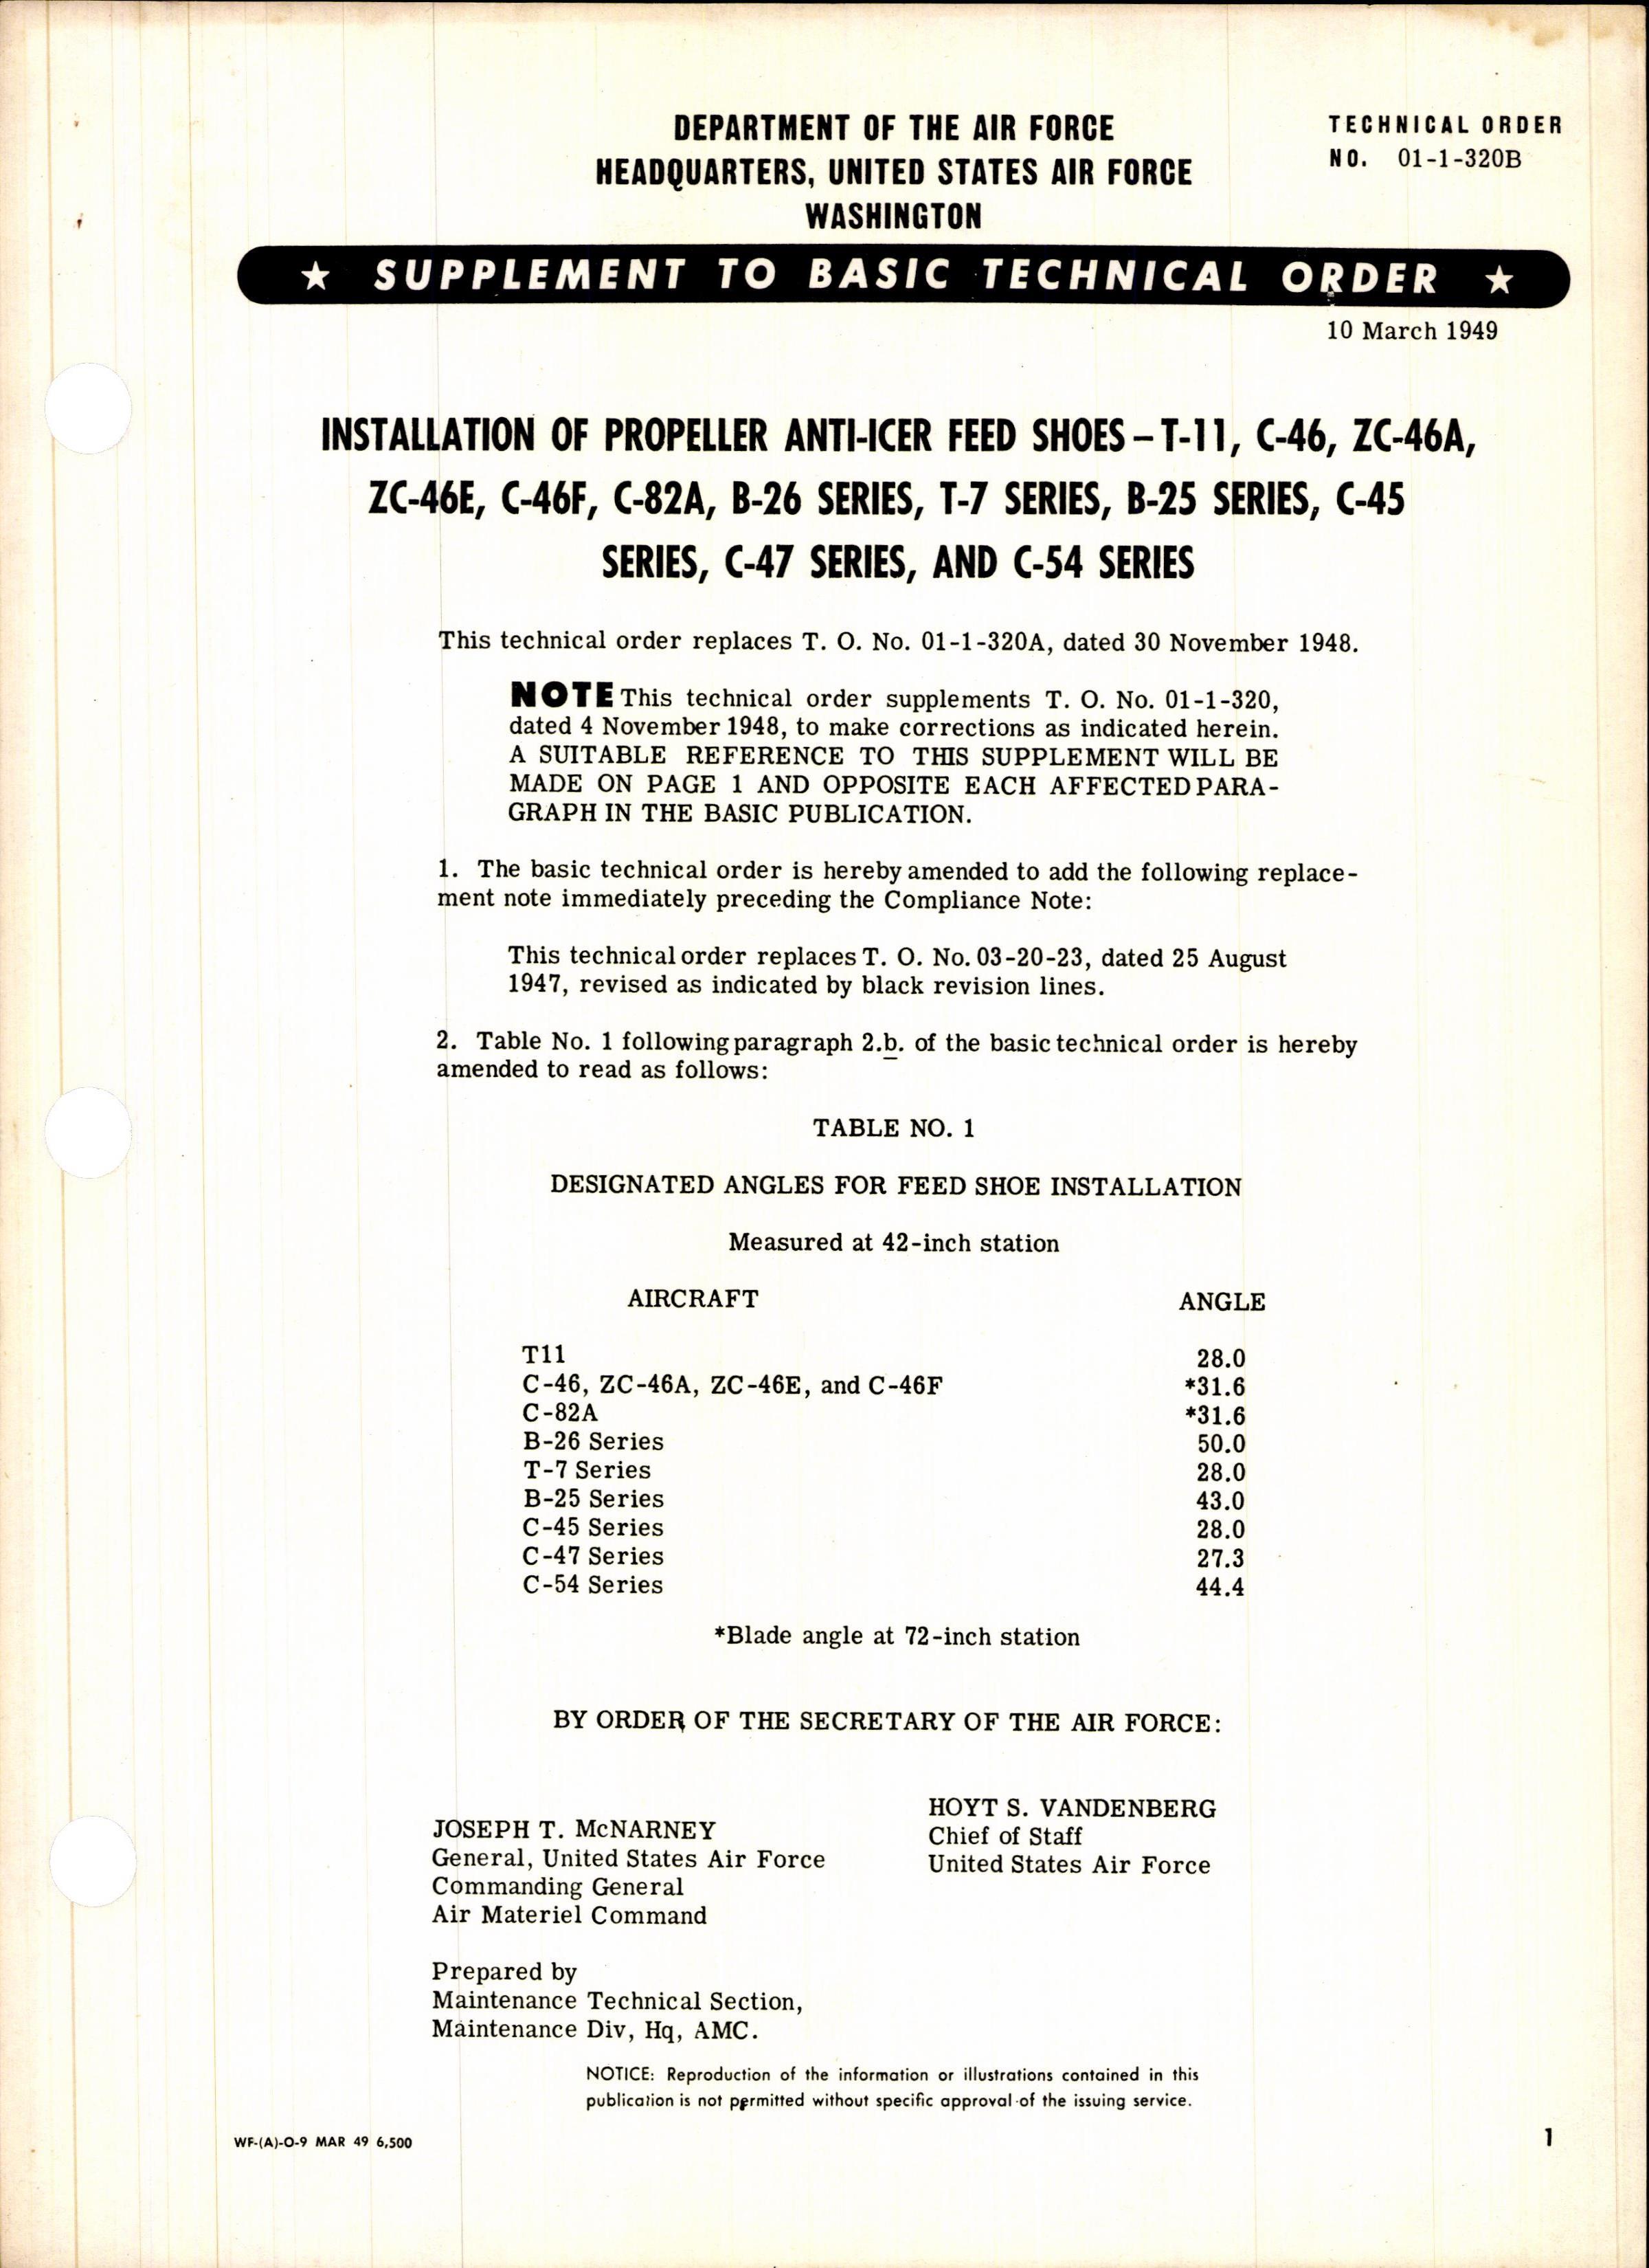 Sample page 1 from AirCorps Library document: Installation of Propeller Anti-Icer Feed Shoes